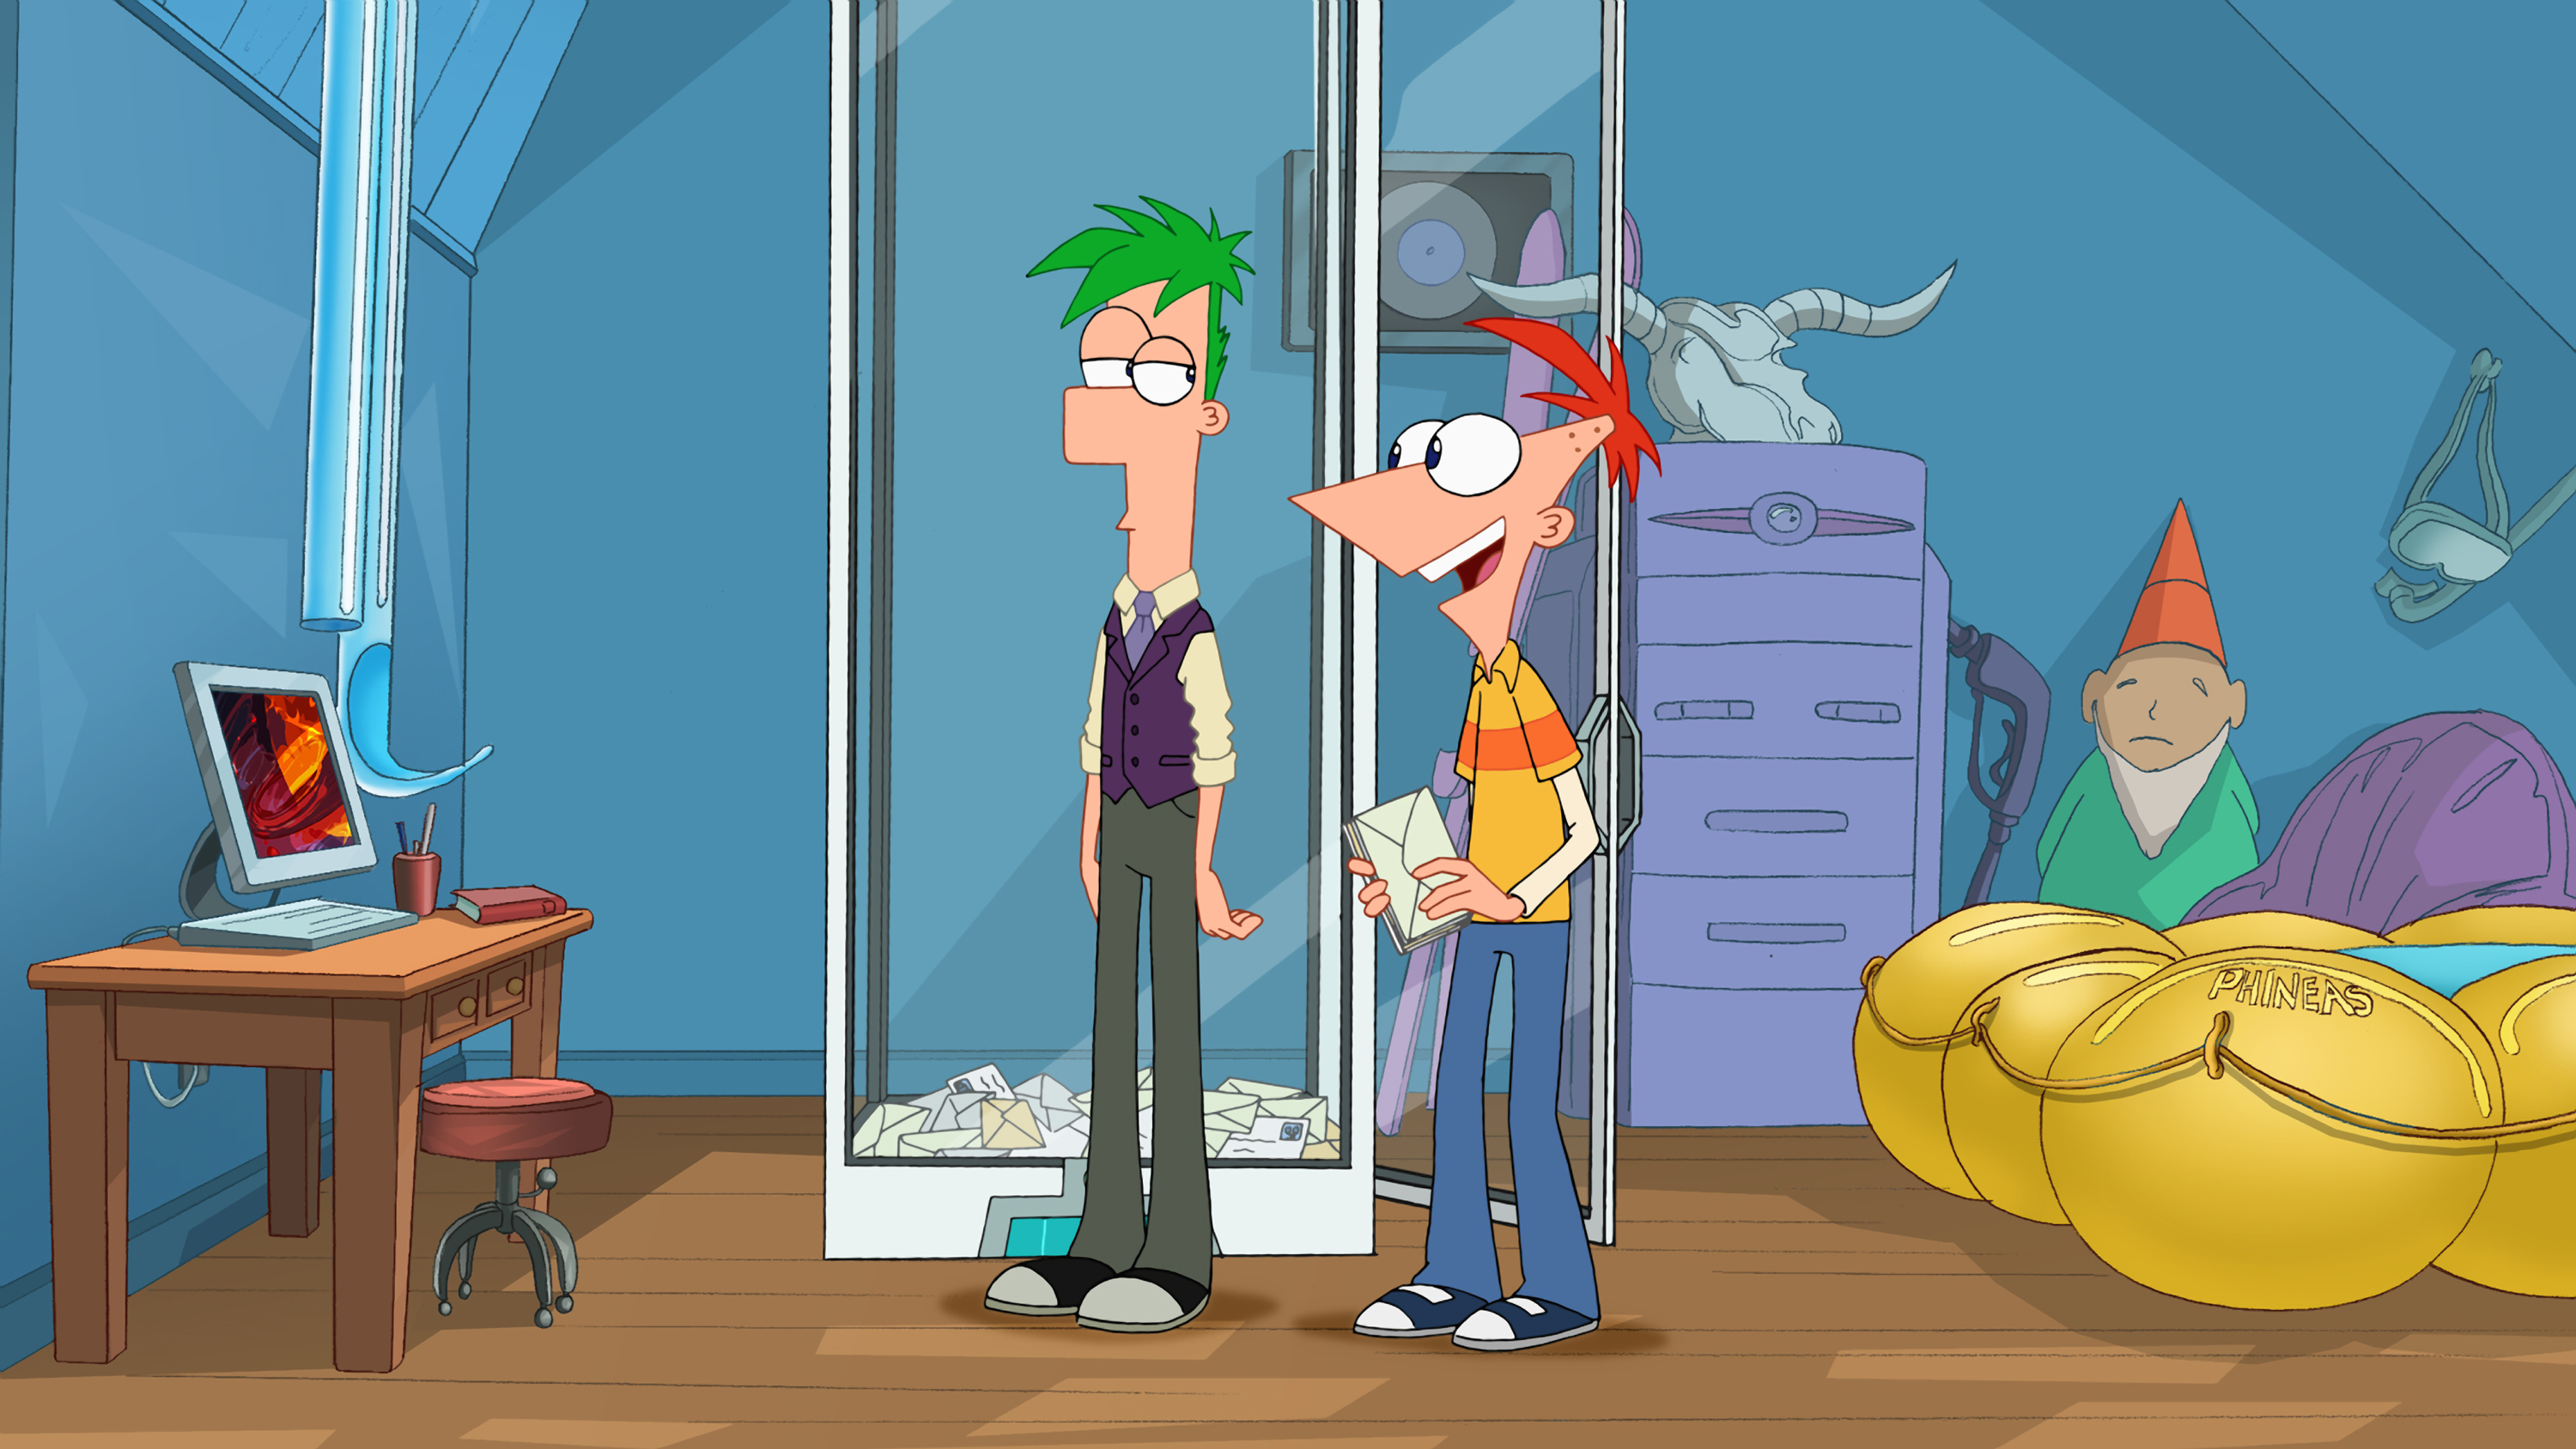 Phineas and Ferb Wiki is a the premier site for all things Phineas and Ferb...